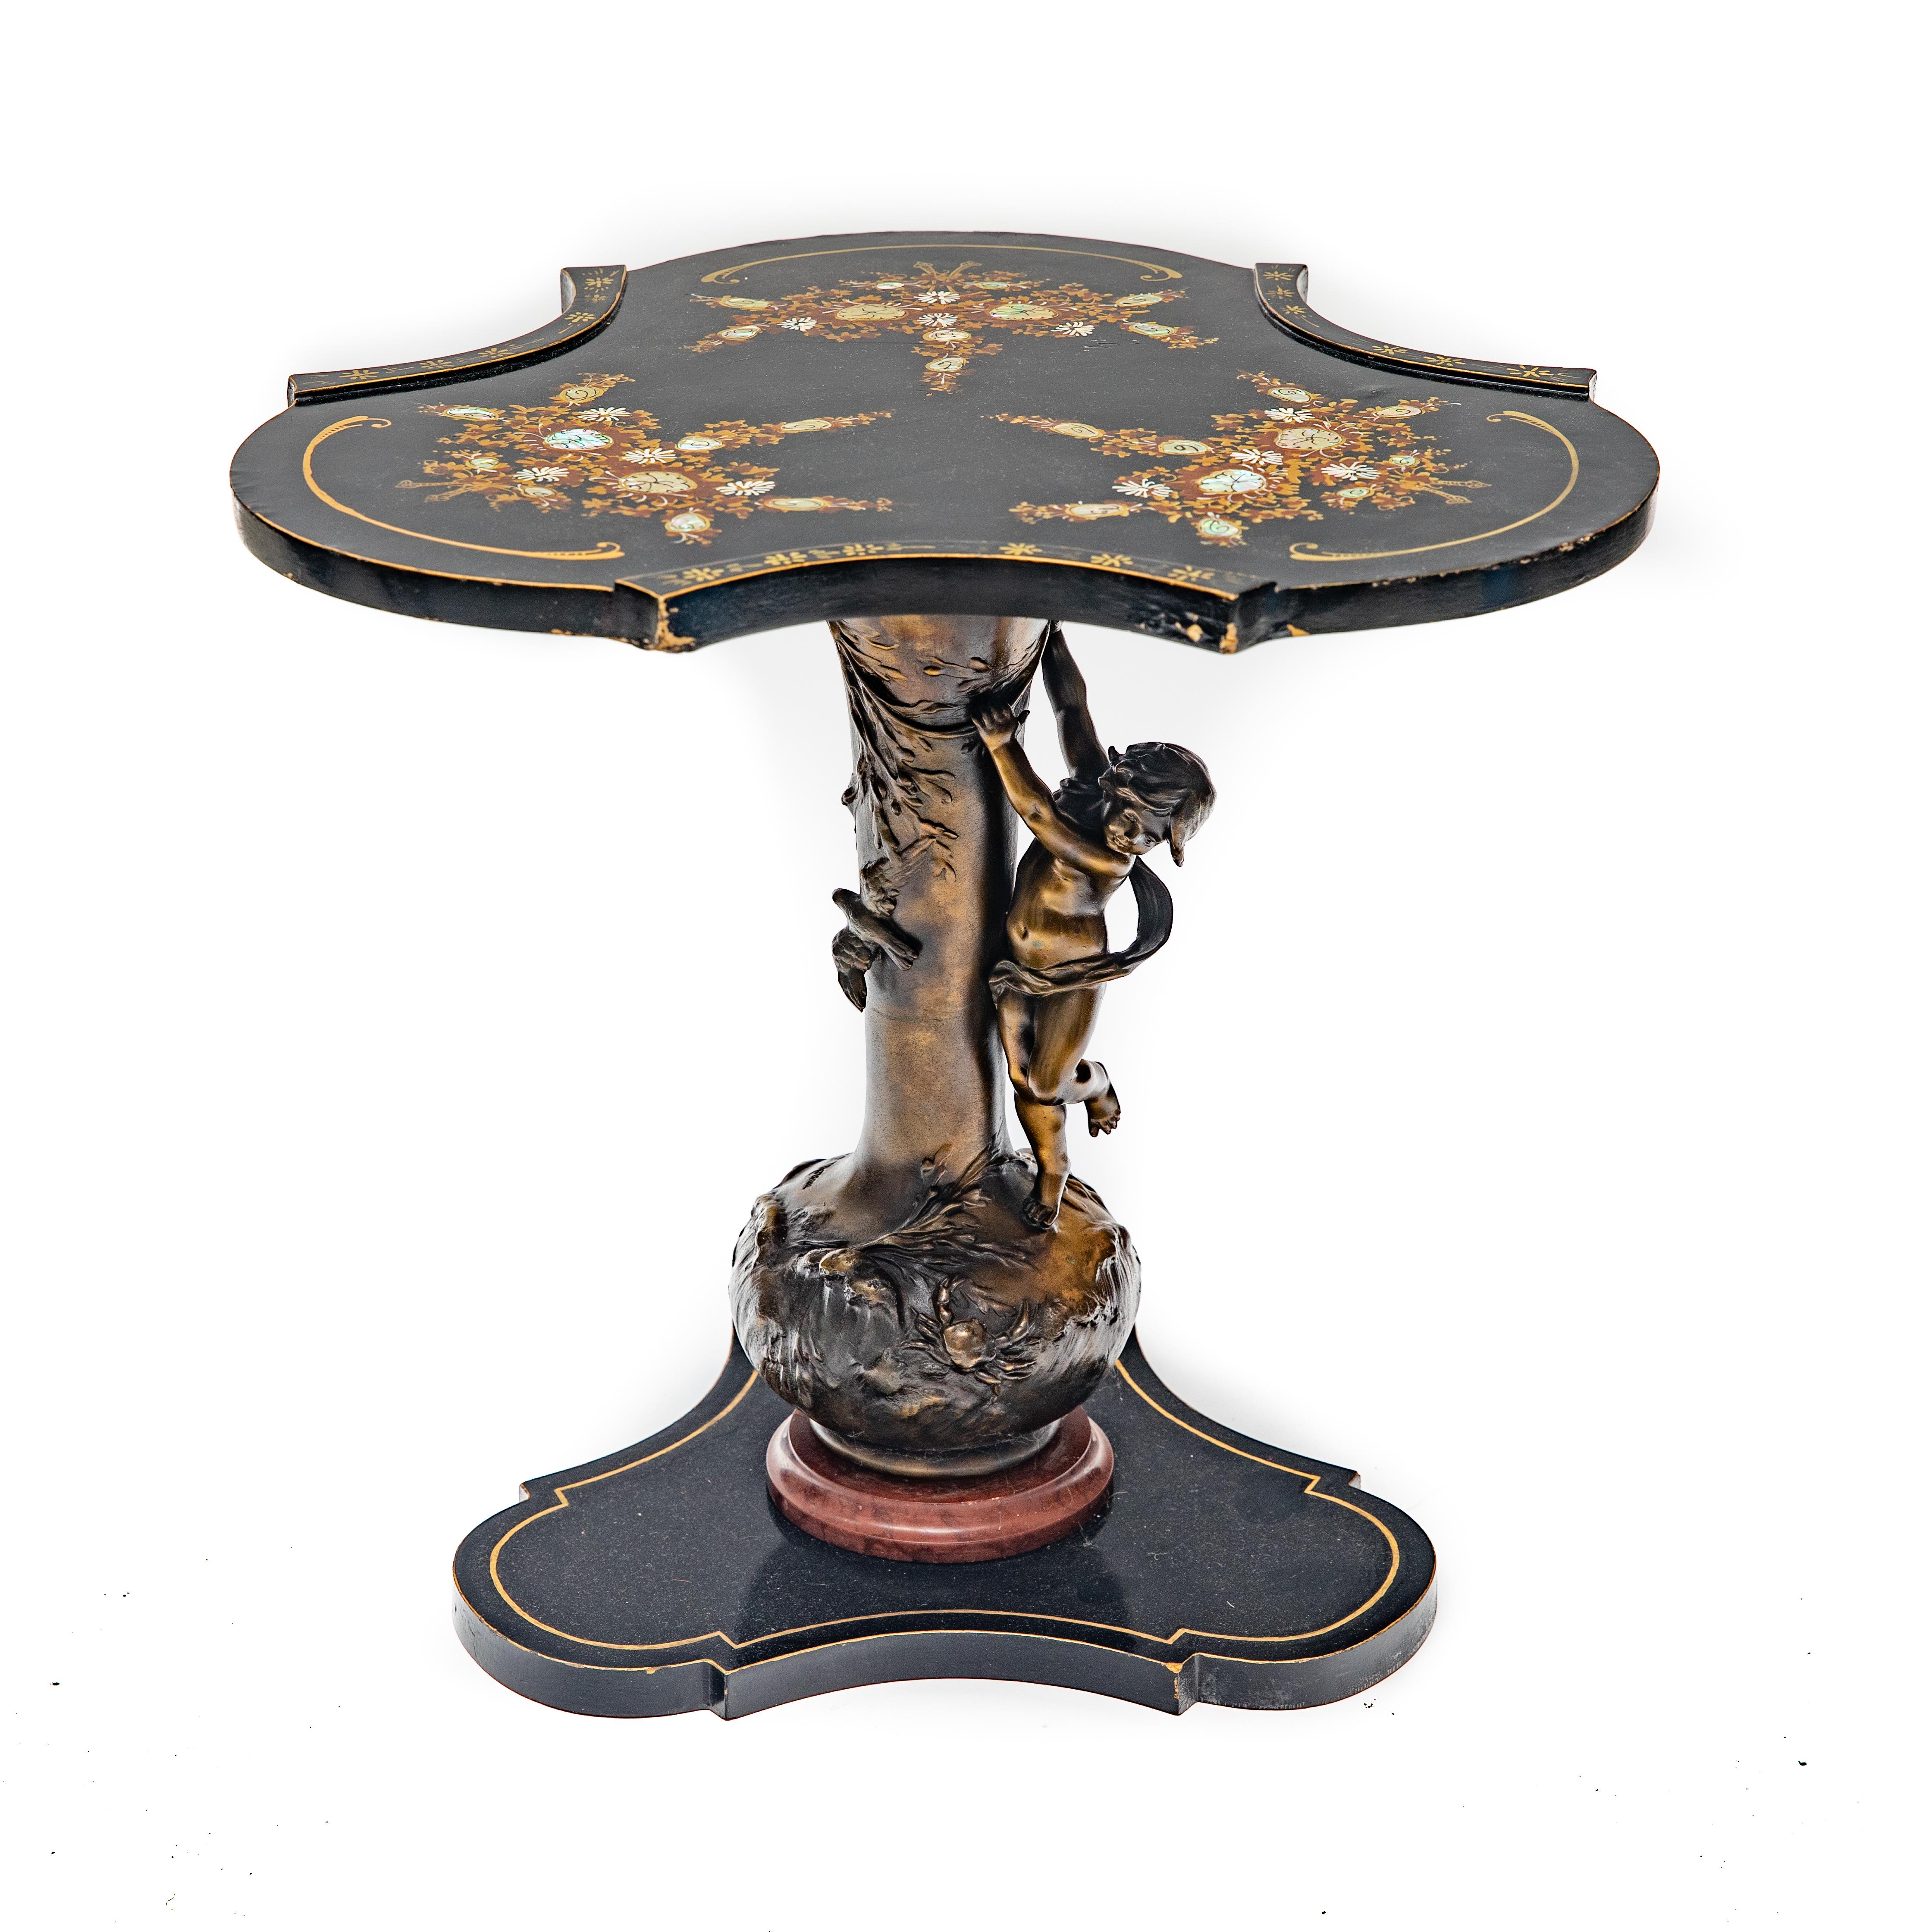 Pair of Louis and Francois Moreau signed Art Nouveau bronze based occasional tables. The wooden top is hand painted, inlaid and ebonized. Dimensions: 18